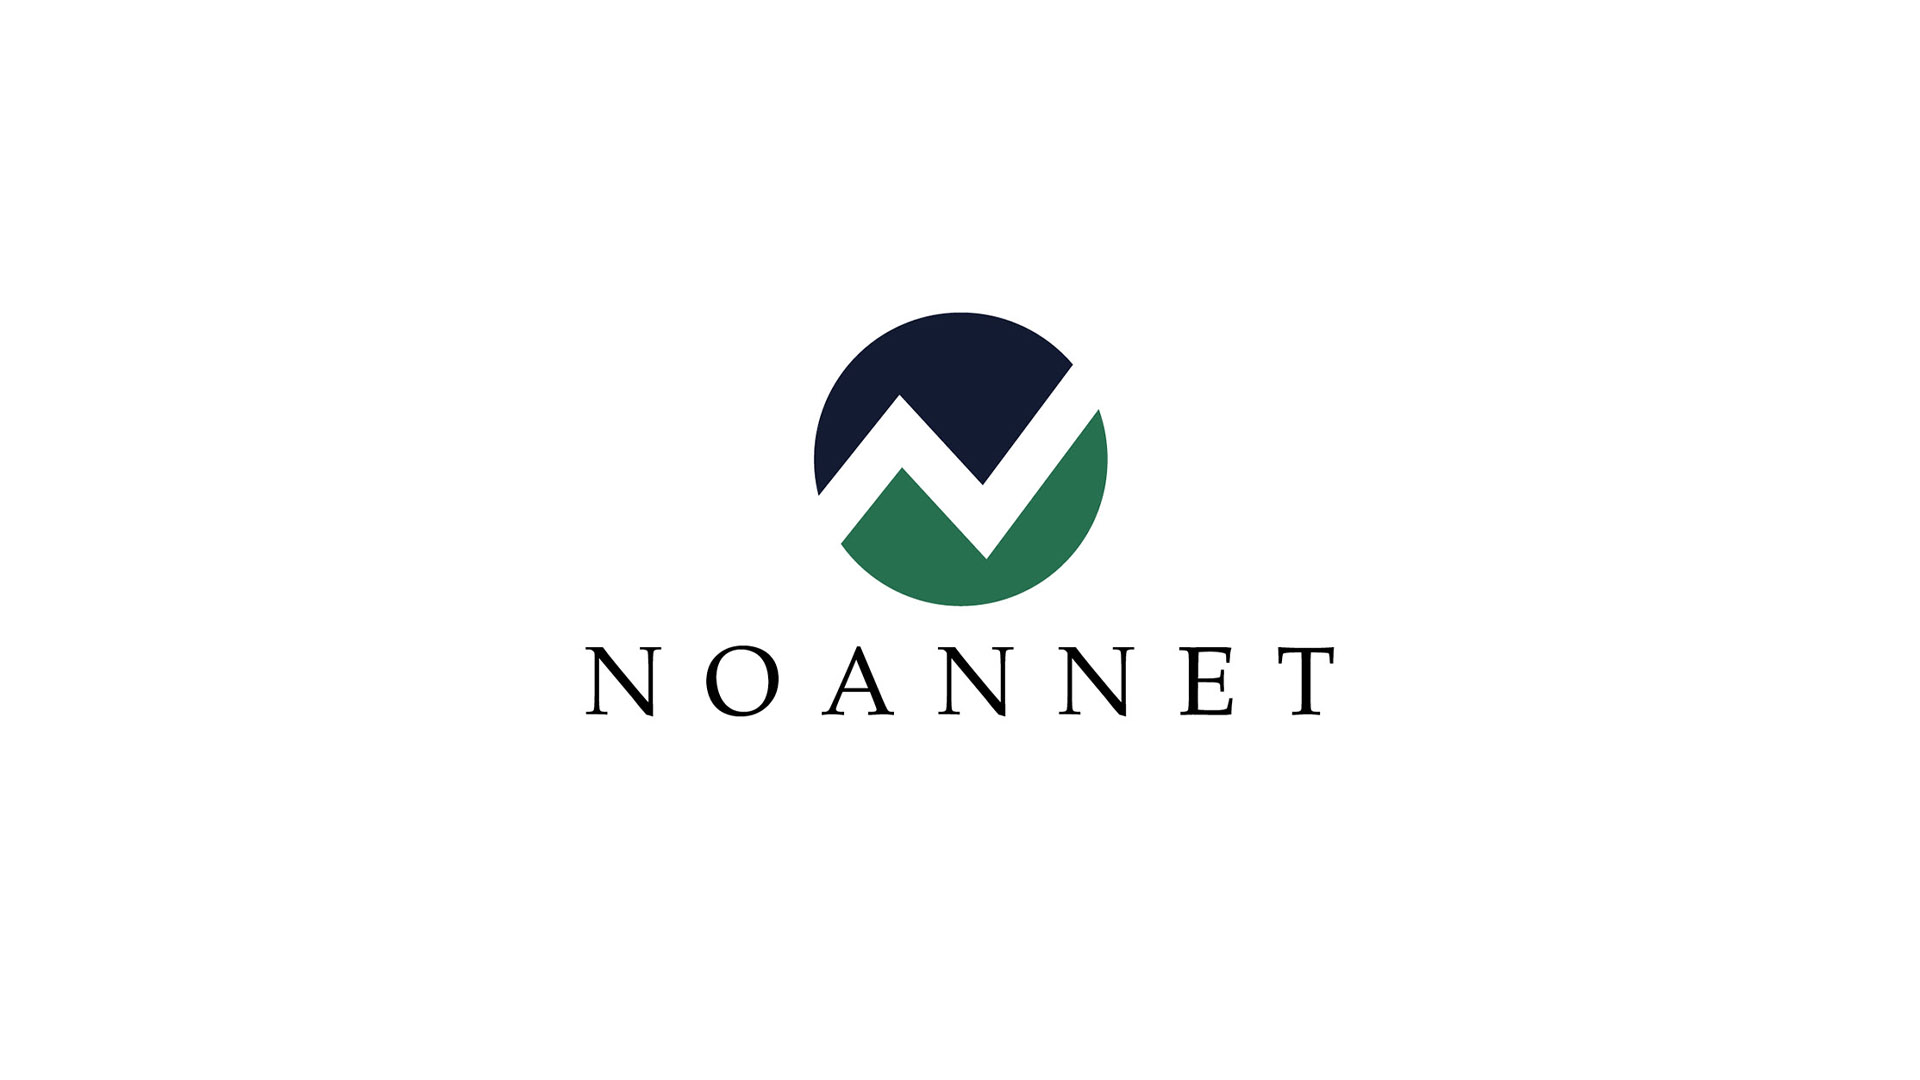 noannet logo on white for logo page